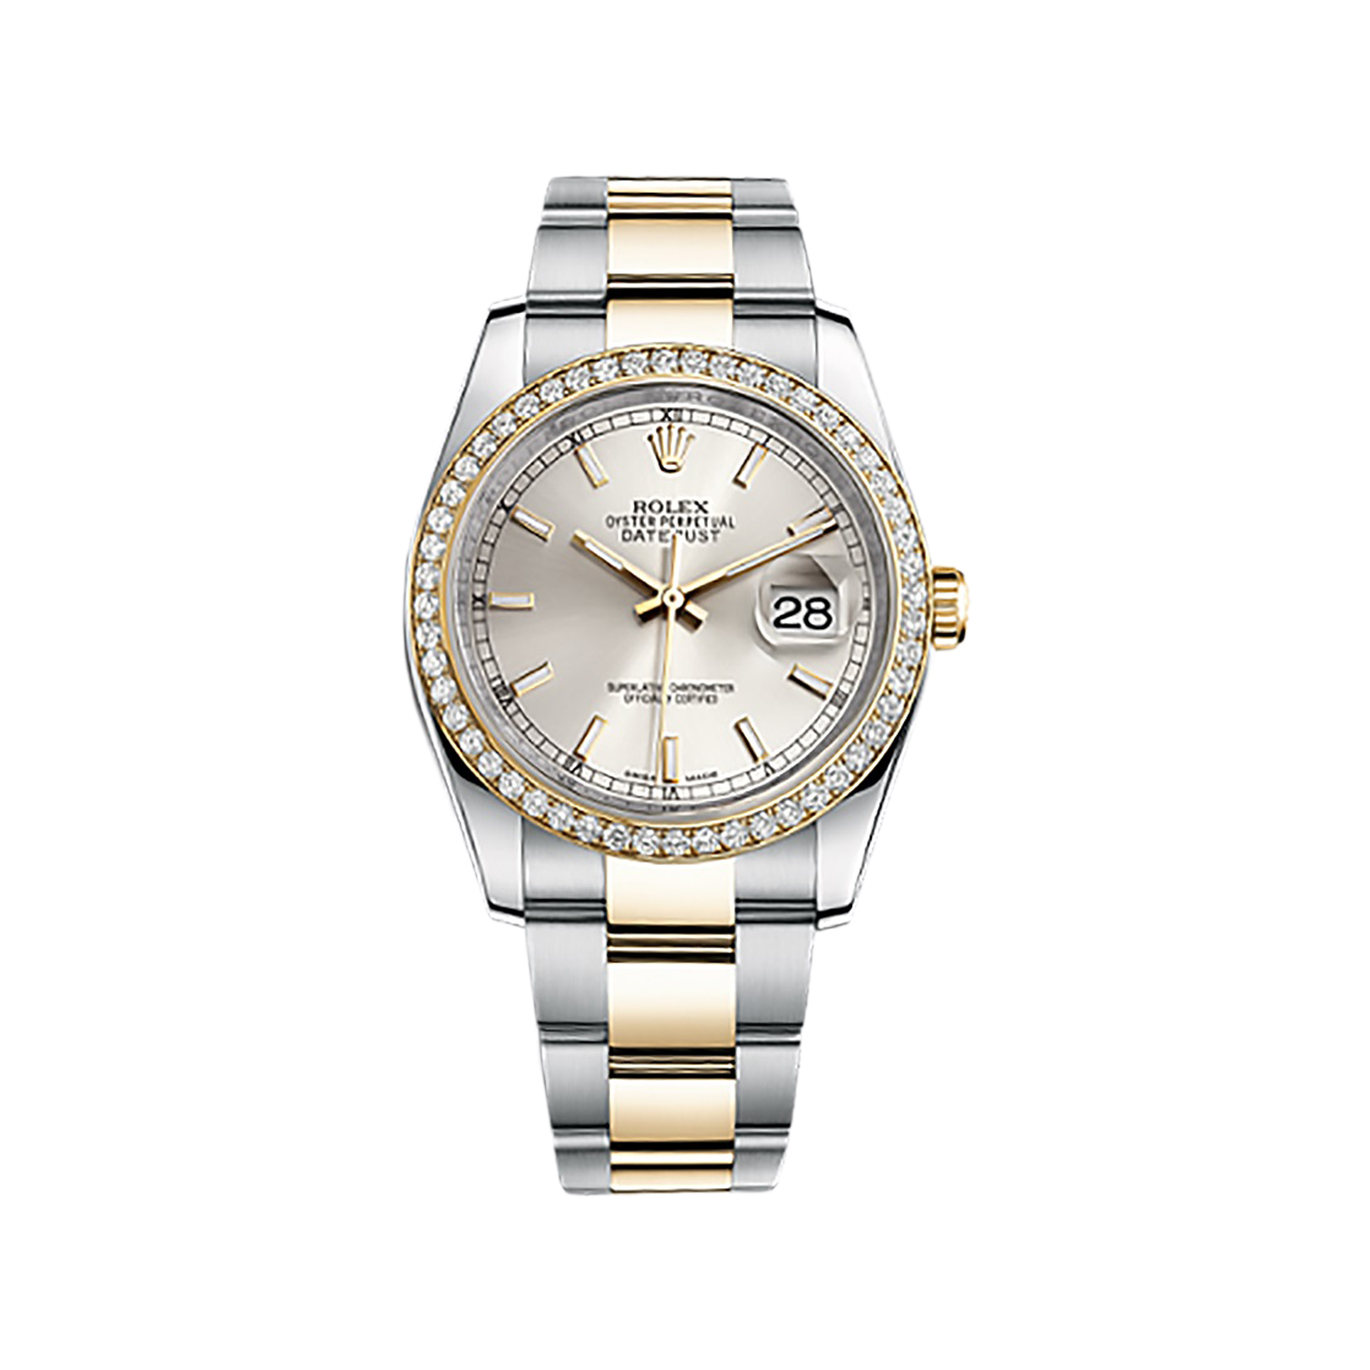 Datejust 36 116243 Gold & Stainless Steel Watch (Silver)